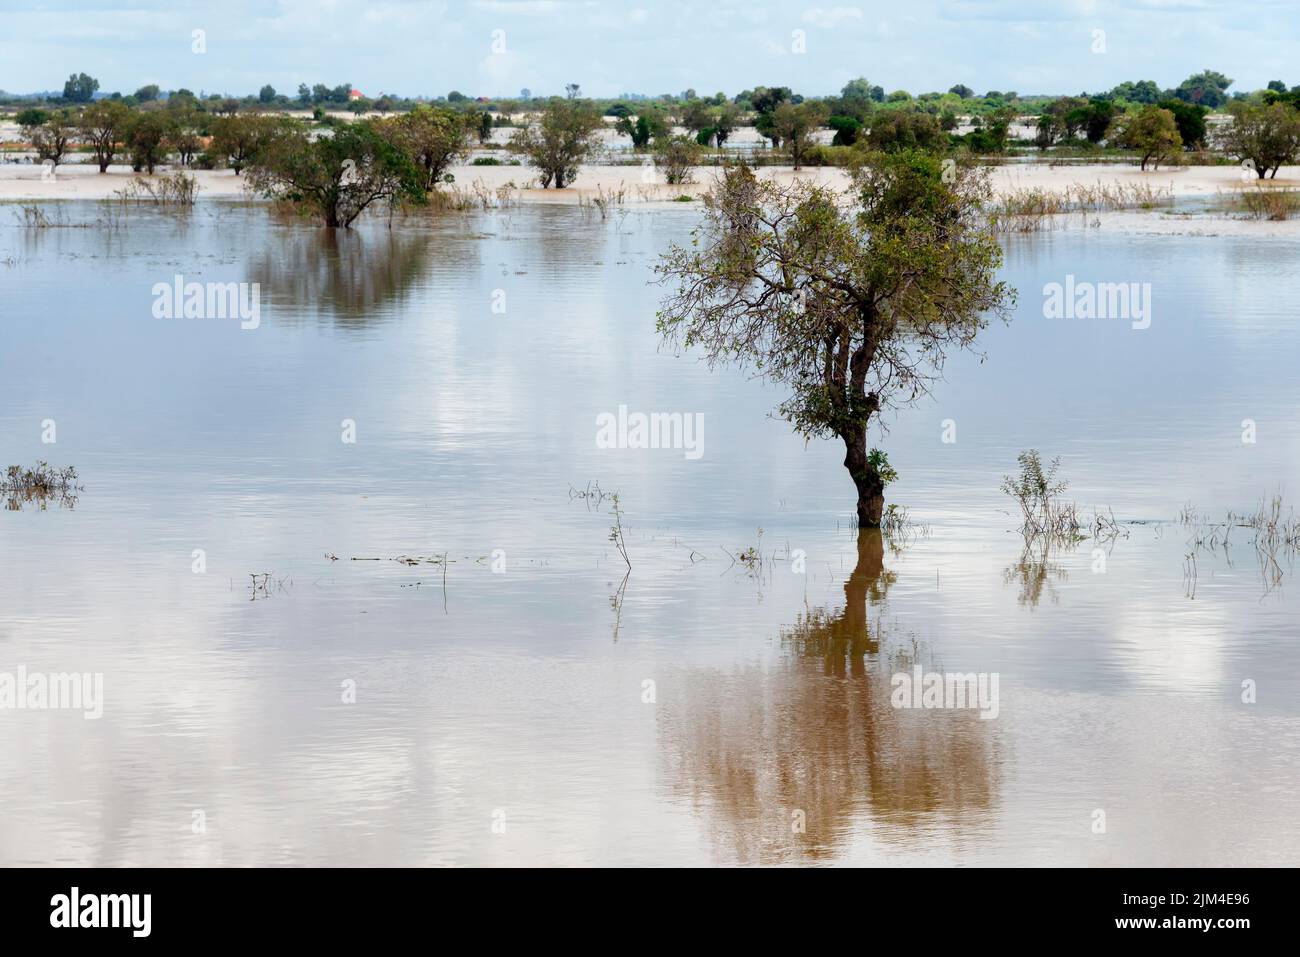 Flooded rural area with trees on water Stock Photo